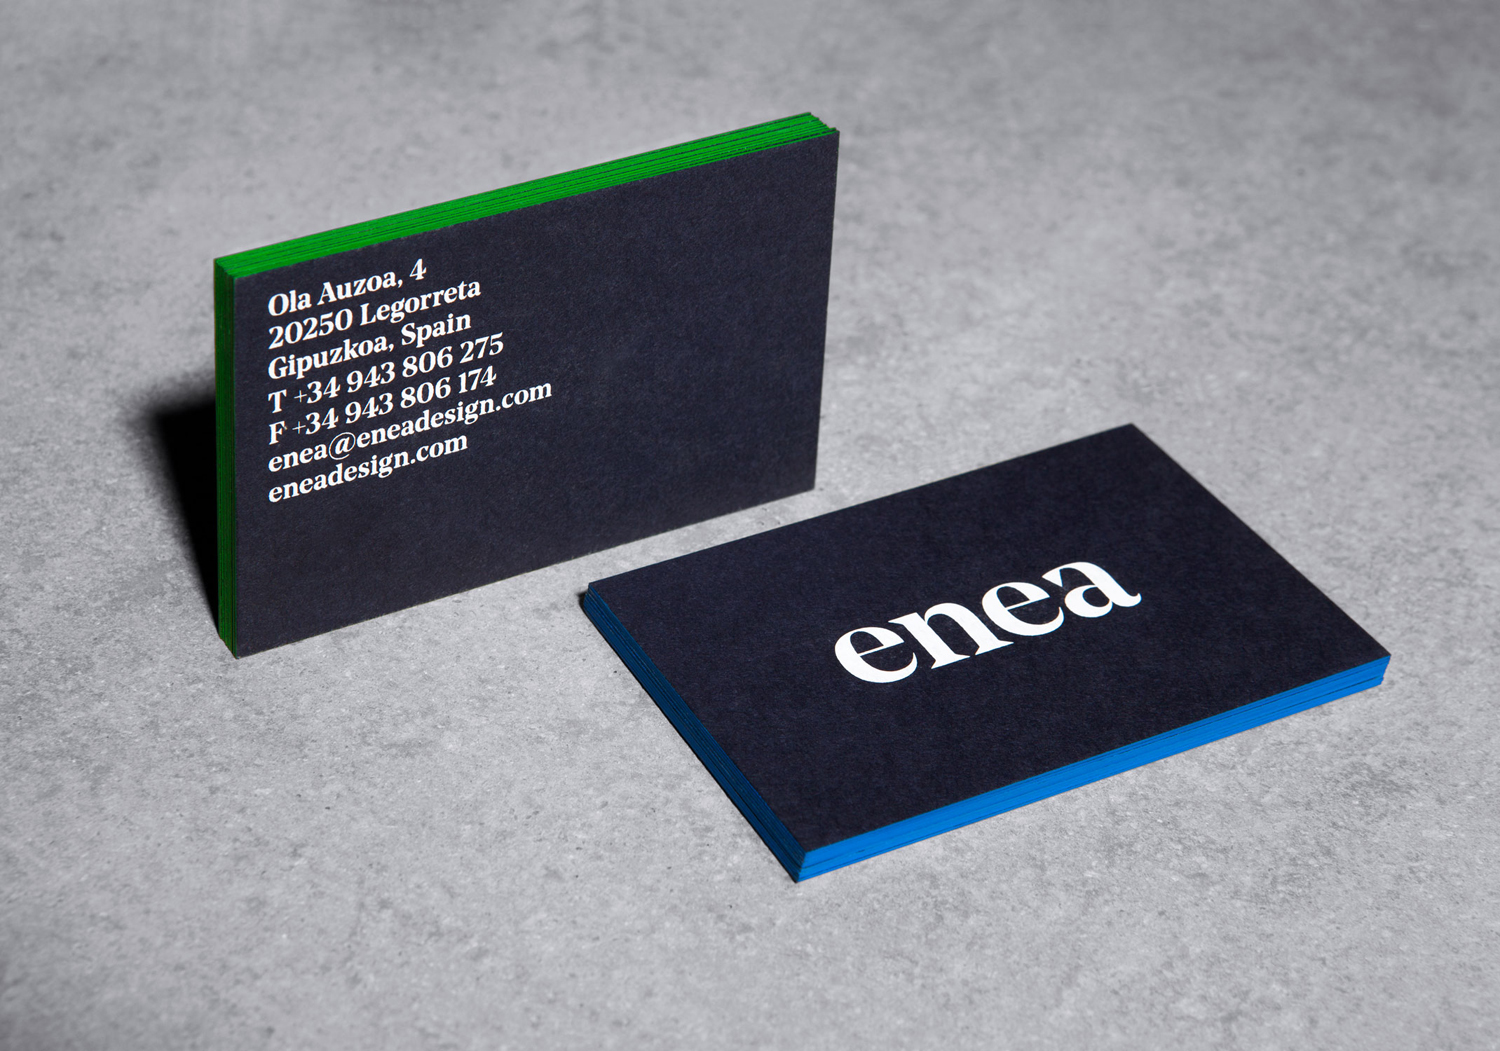 Edge painted business cards for furniture design and manufacturing business Enea designed by Clase bcn 